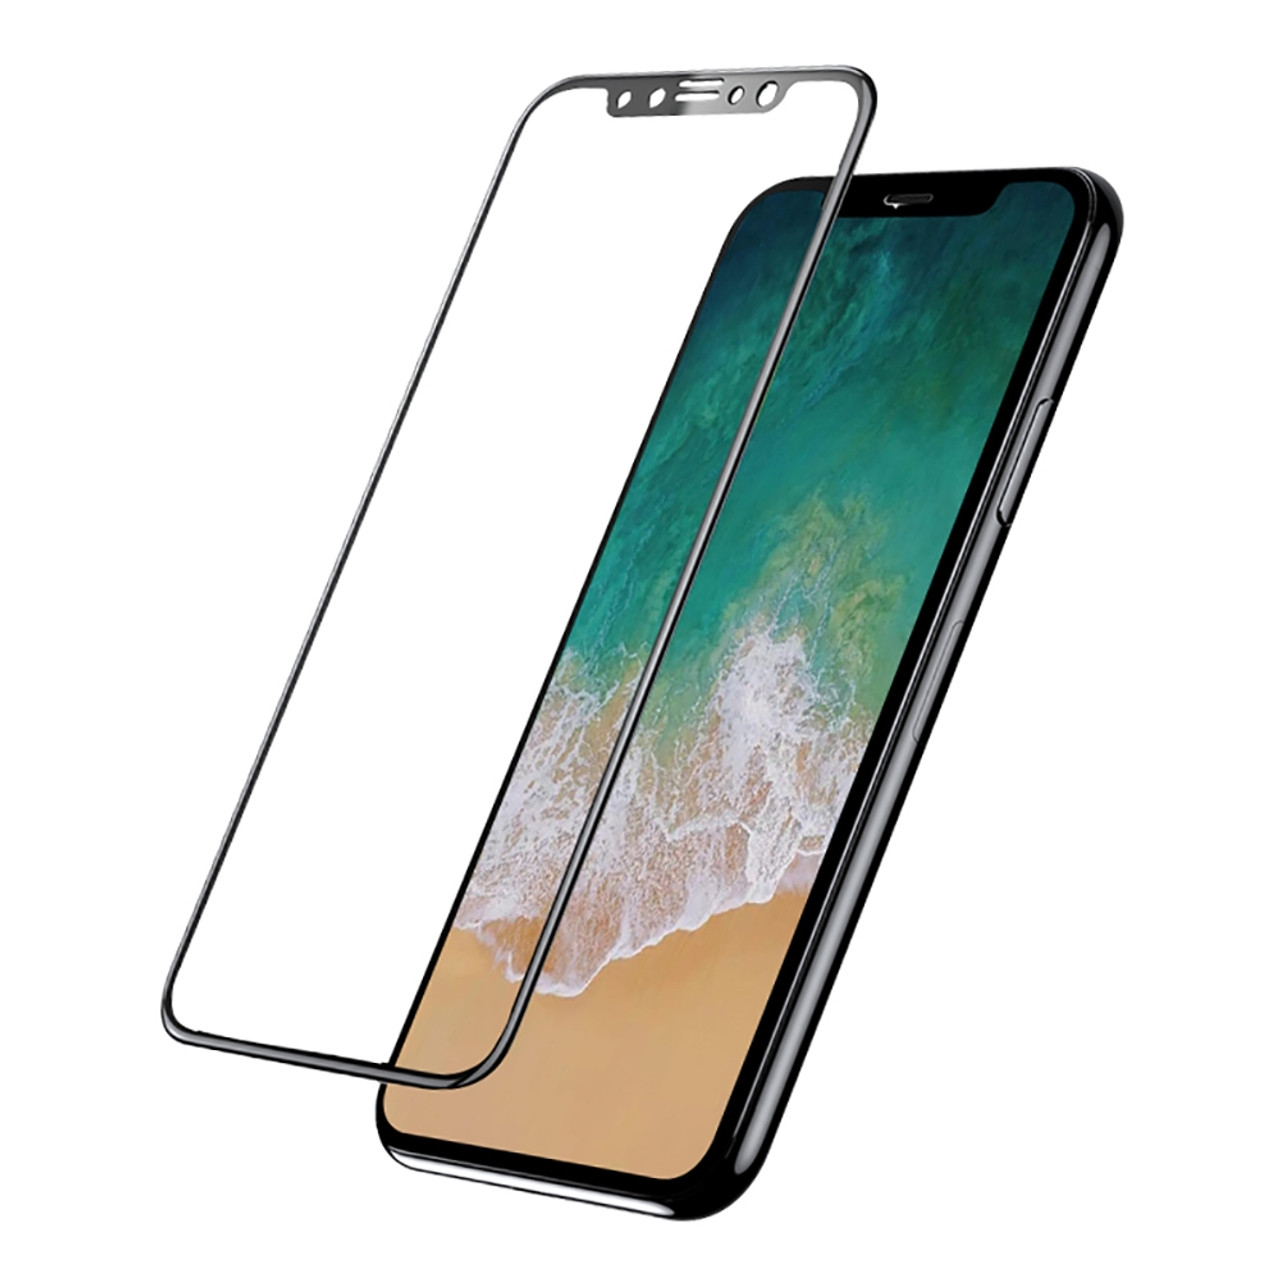 UPTab iPhone X Screen Protector Tempered Glass Screen 3D ...